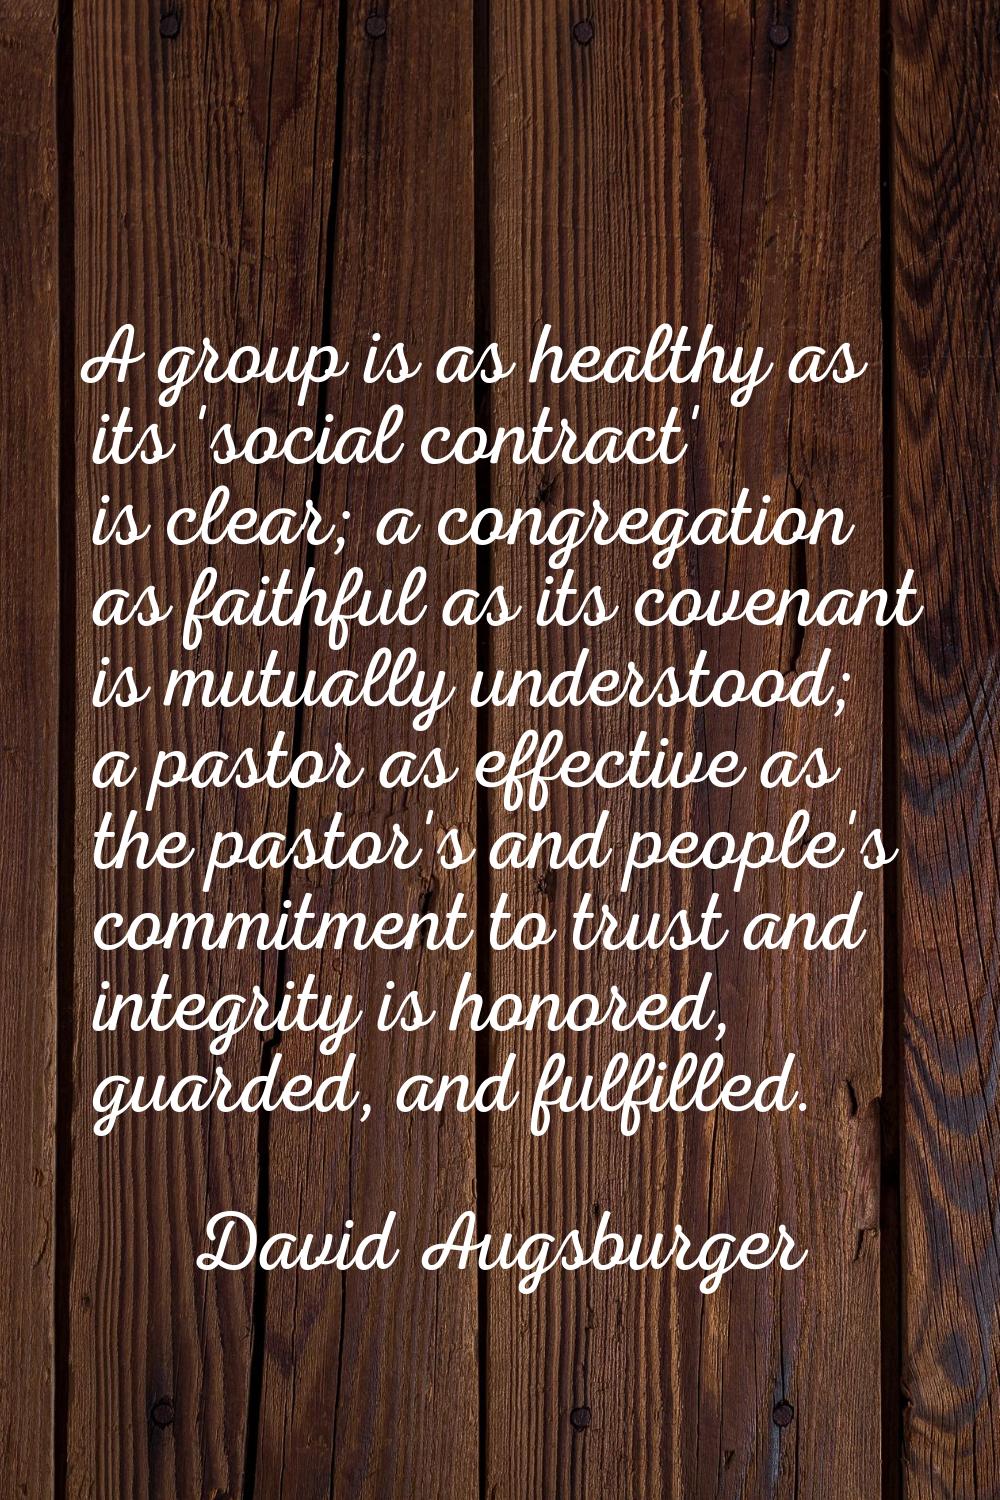 A group is as healthy as its 'social contract' is clear; a congregation as faithful as its covenant